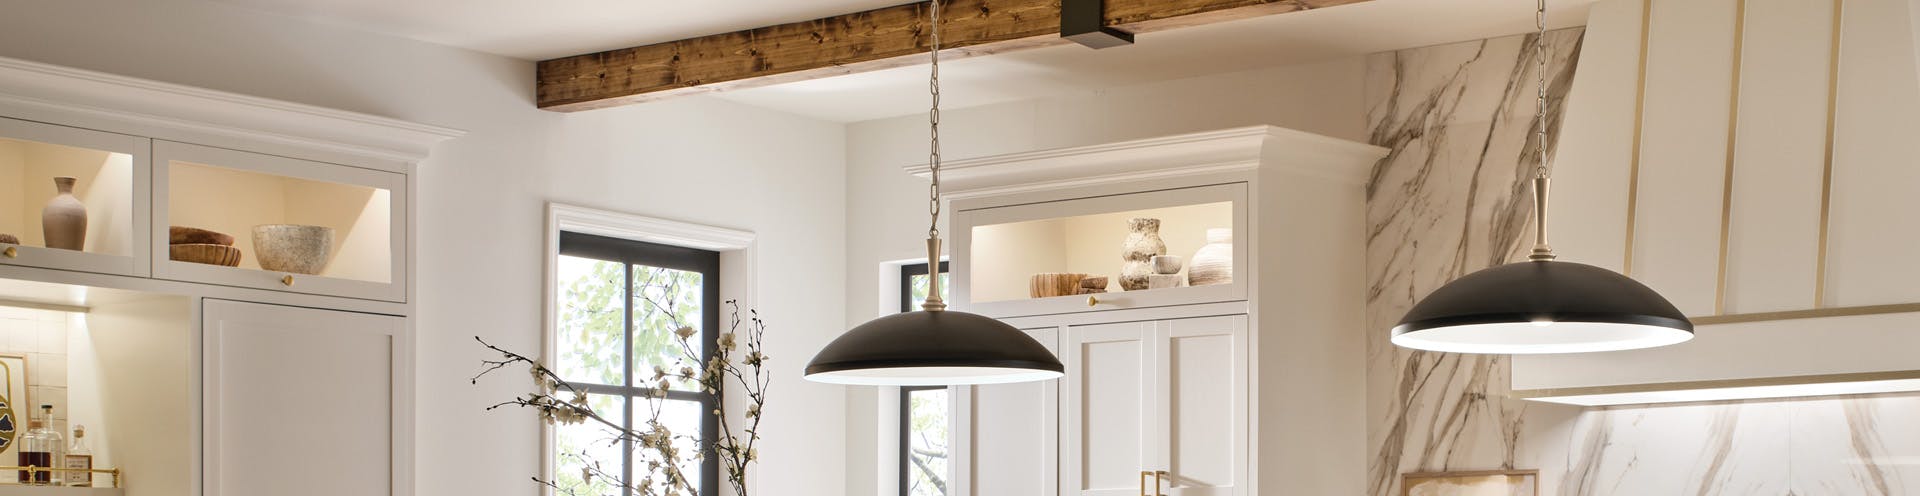 White kitchen with marble back splash, naural wood ceiling beams and two delarosa pendants in black